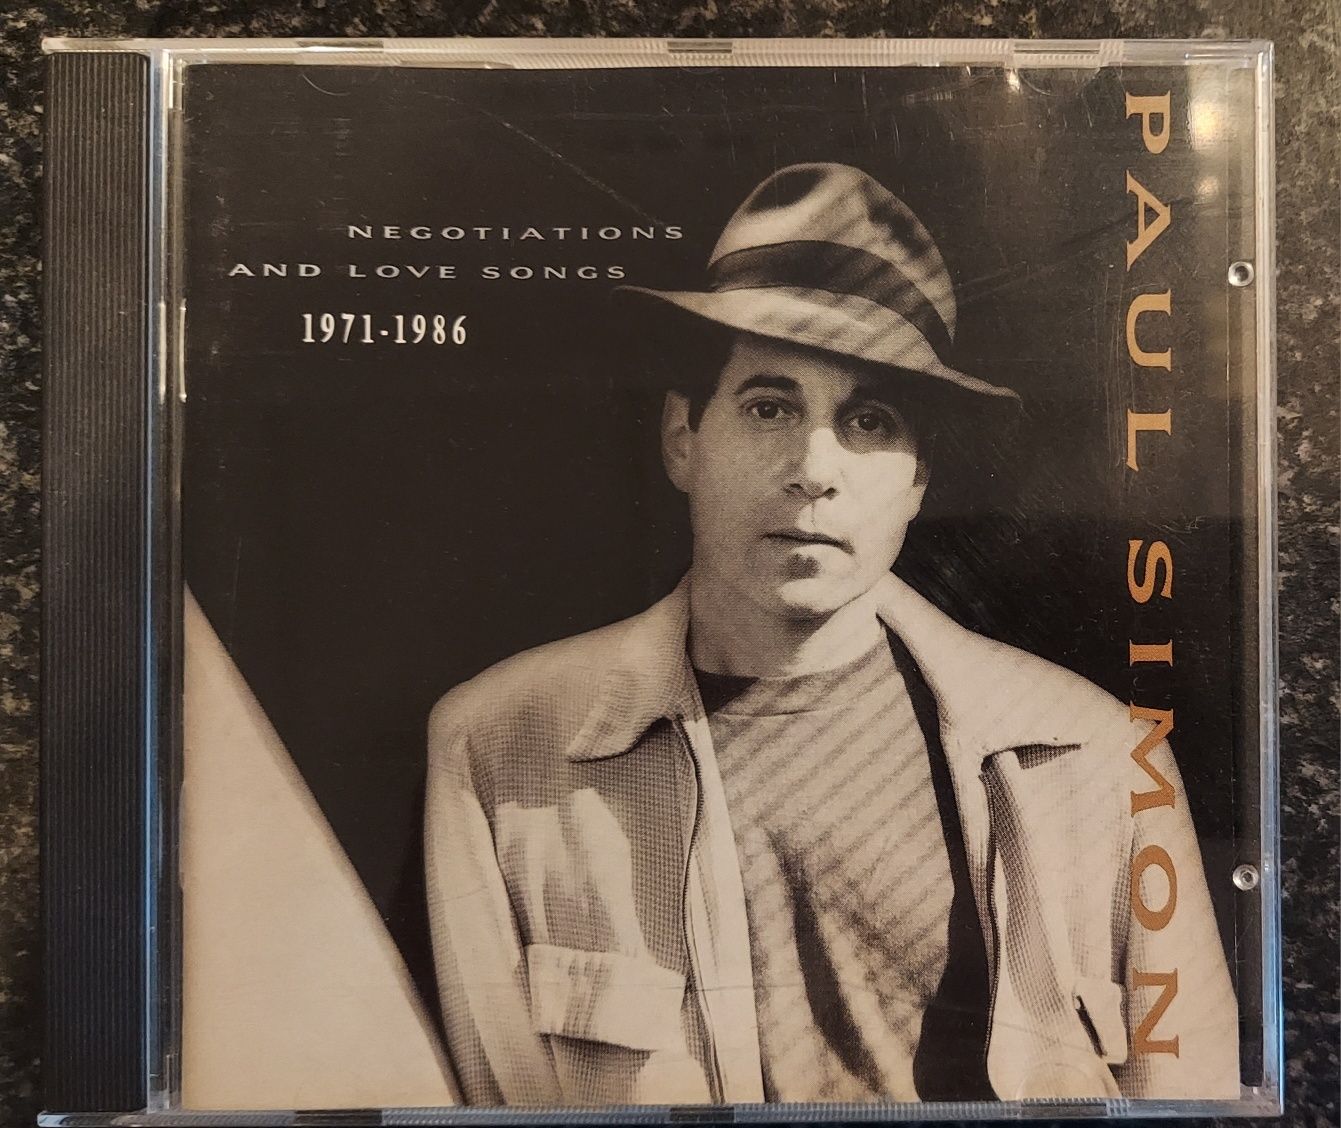 Cd Paul Simon - negotiations and love songs